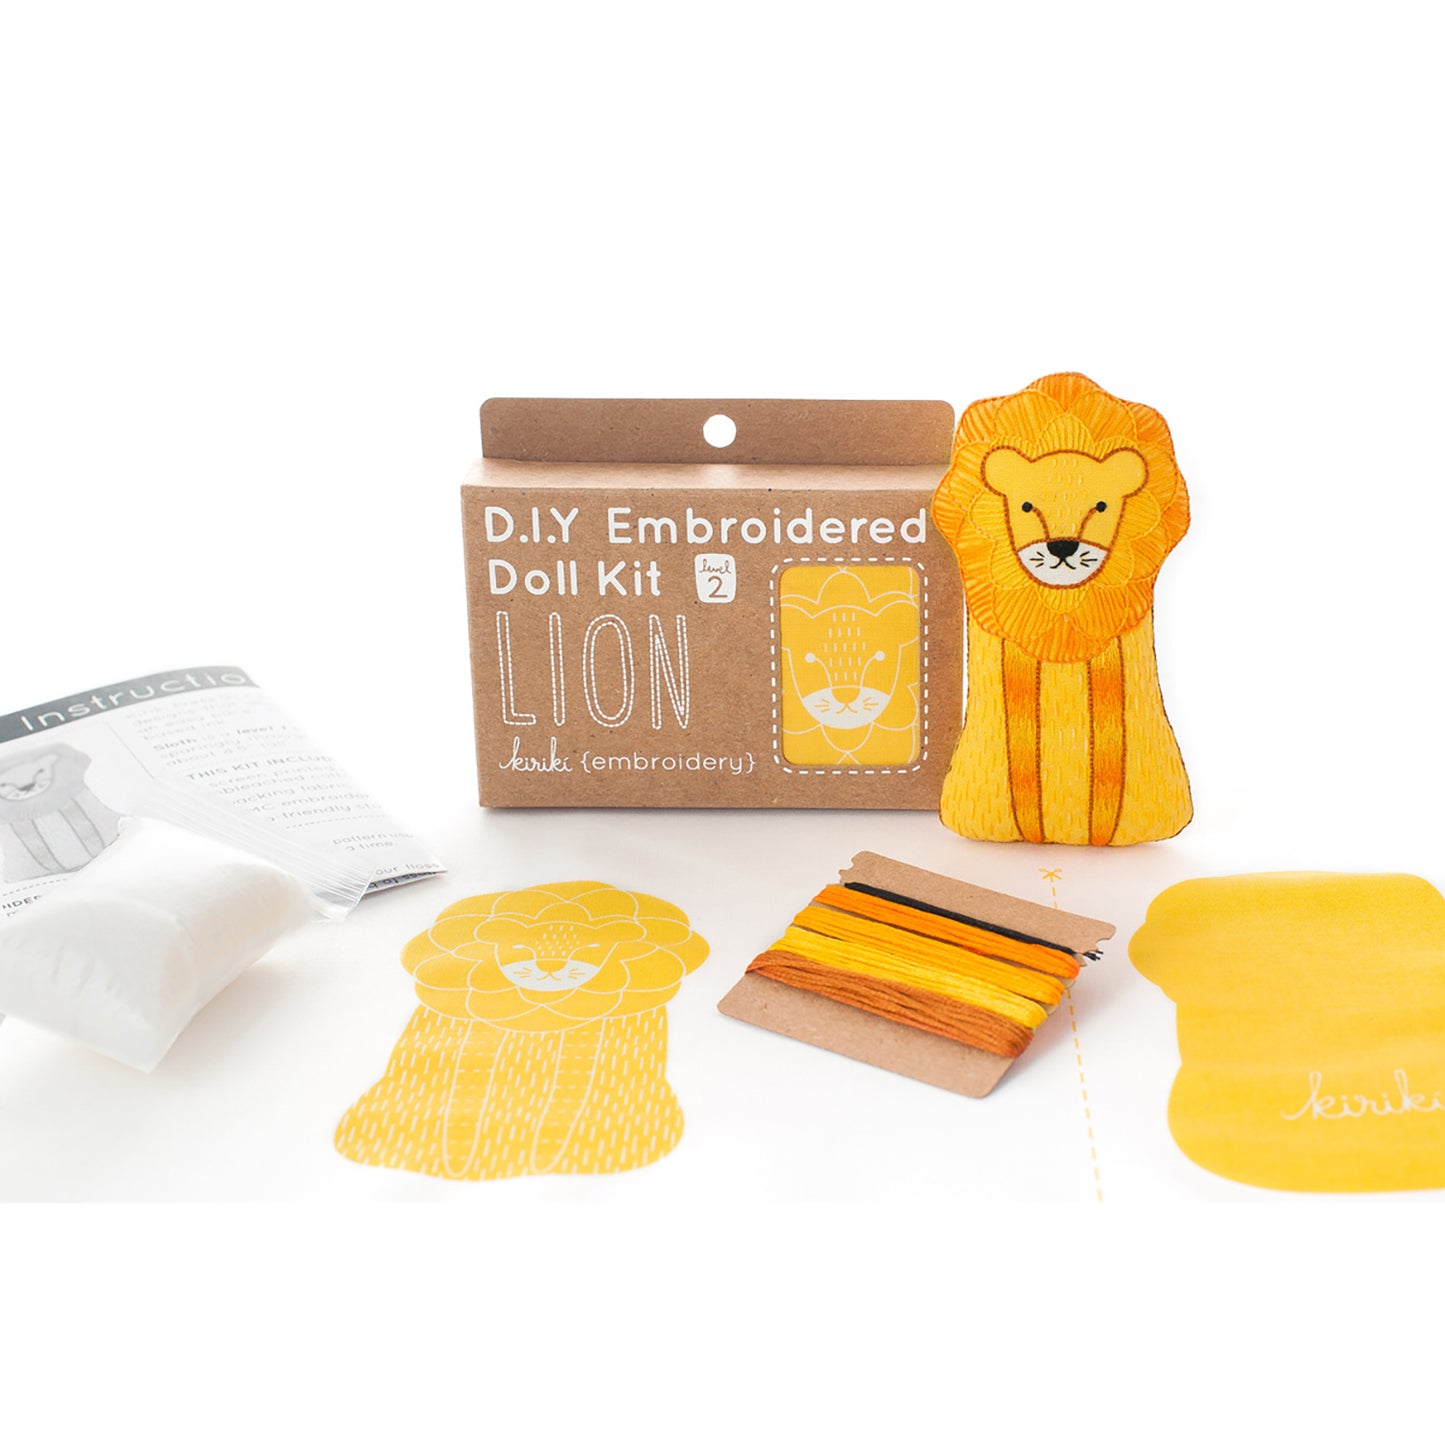 D.I.Y. Embroidered Doll Kit - Lion Alternative View #2